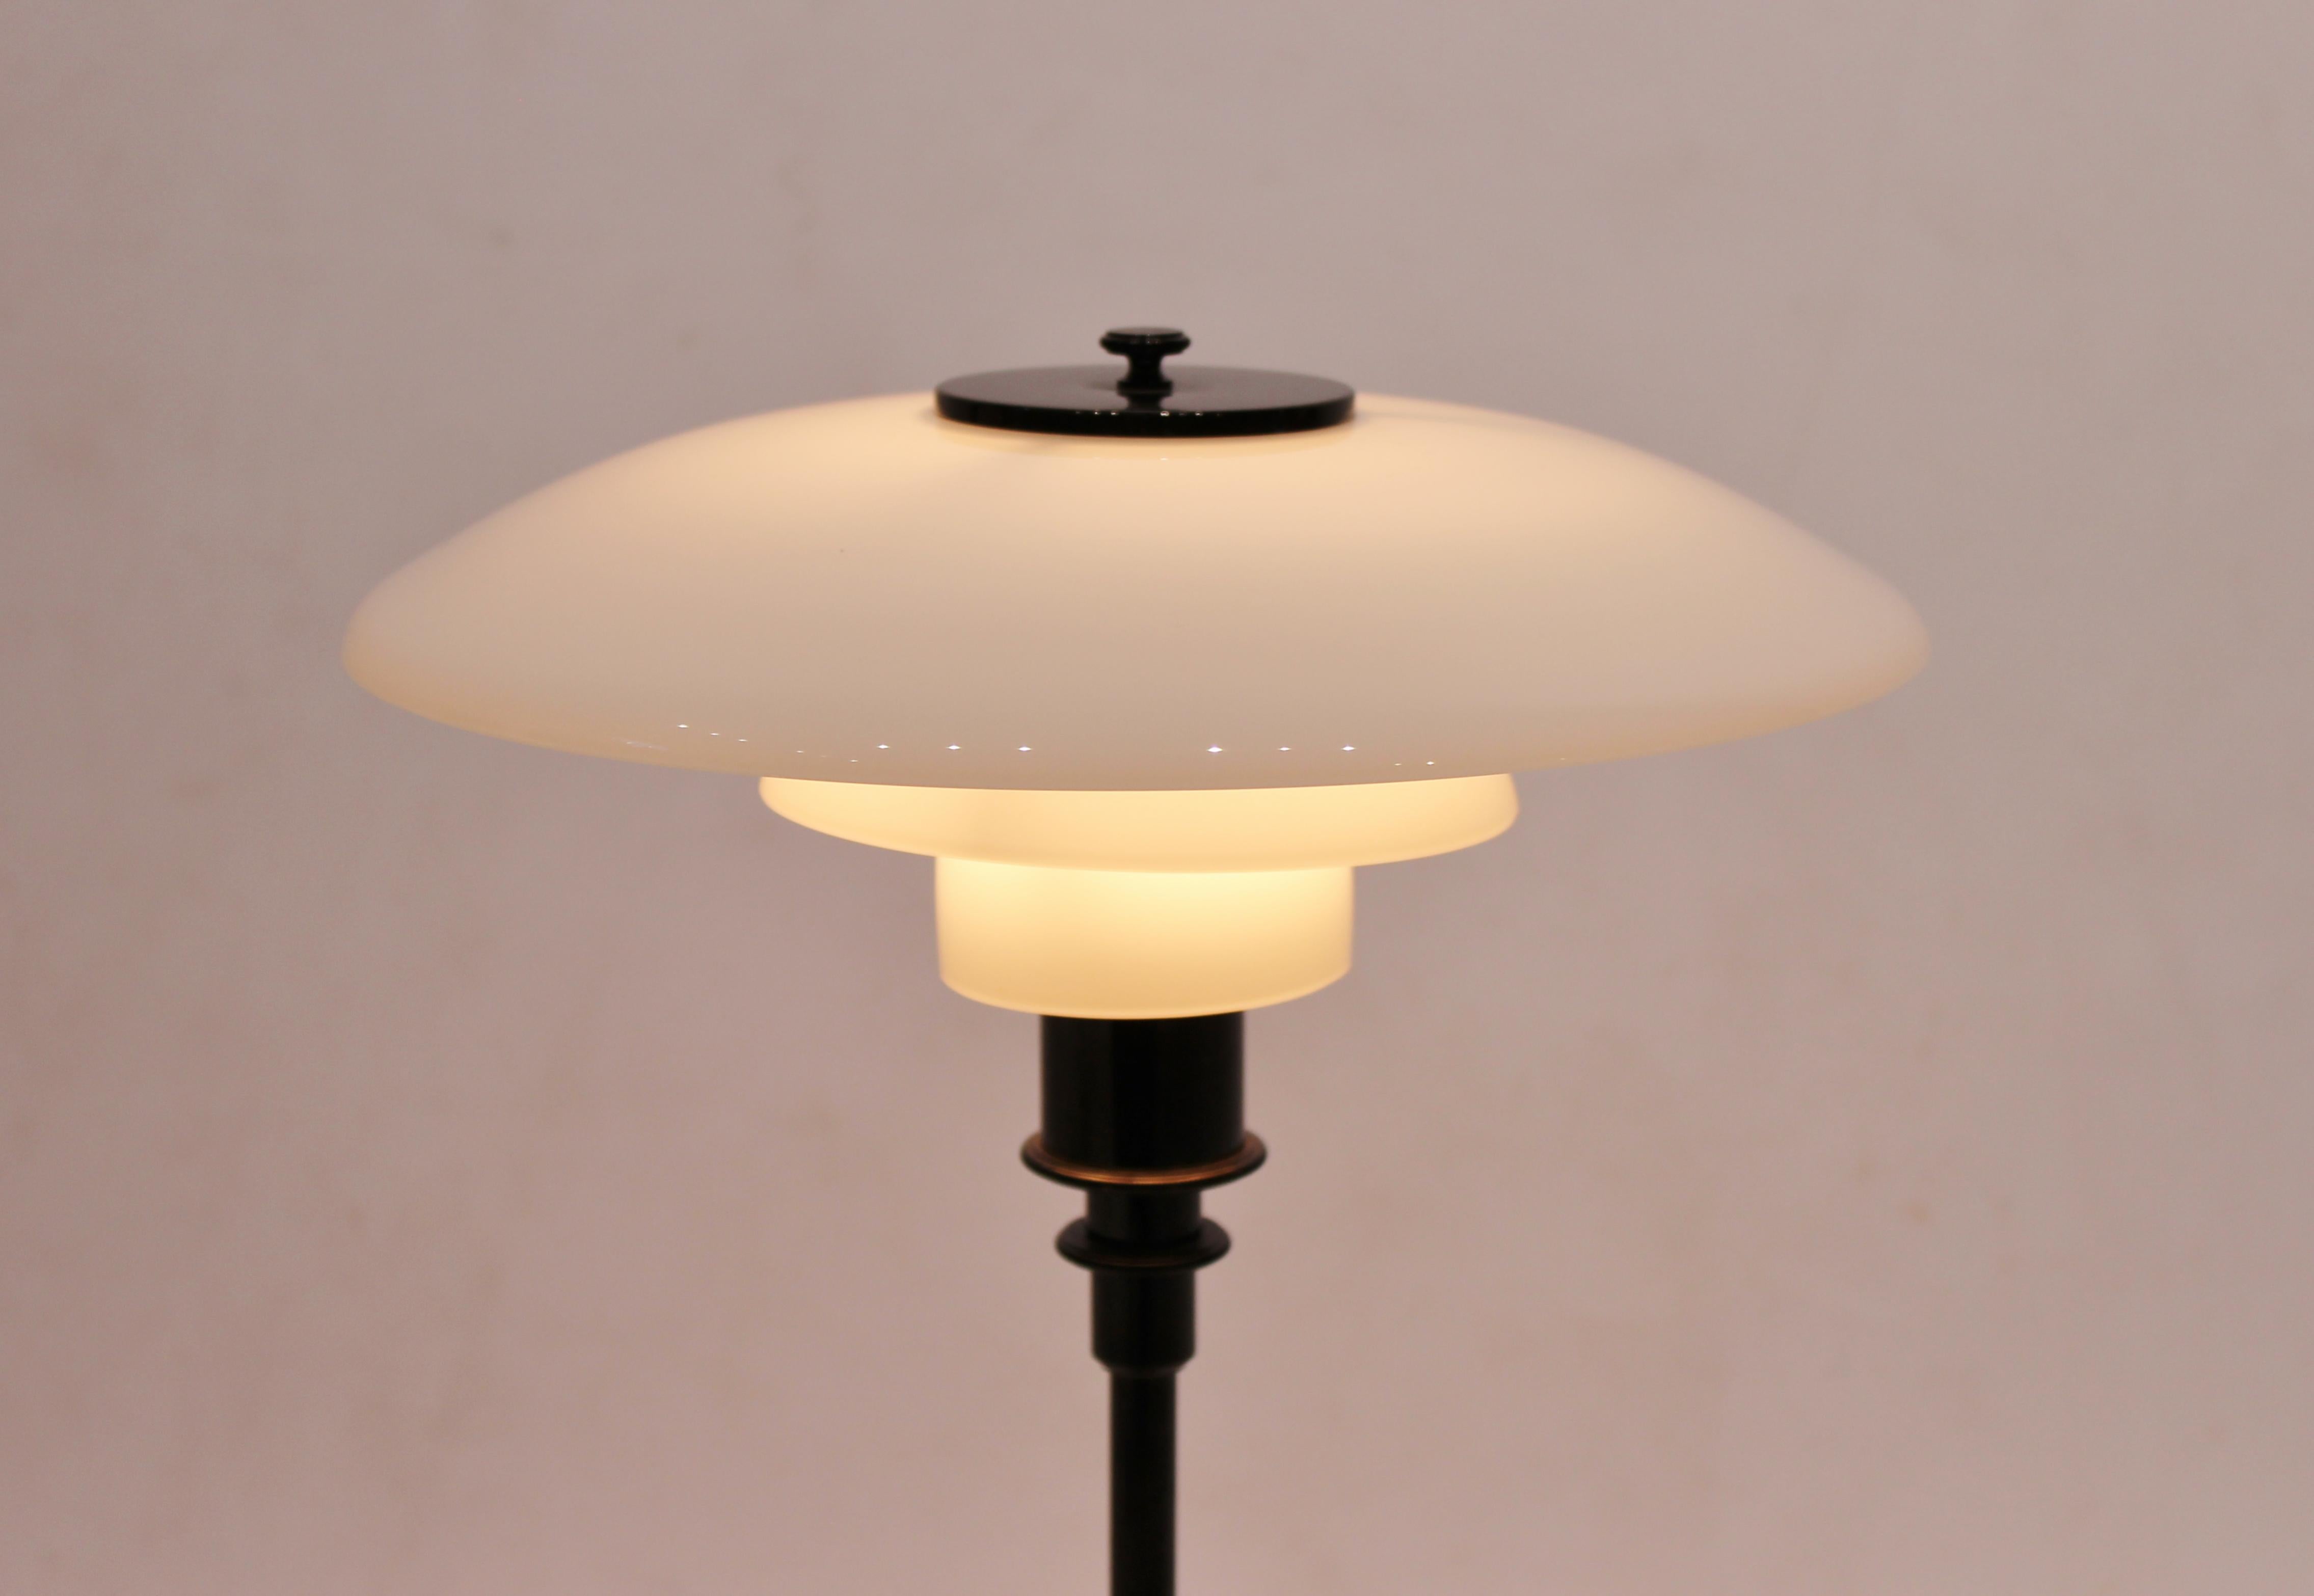 Scandinavian Modern Table Lamp, Model 3/2, with Black Frame and Opaline Glass, by Poul Henningsen